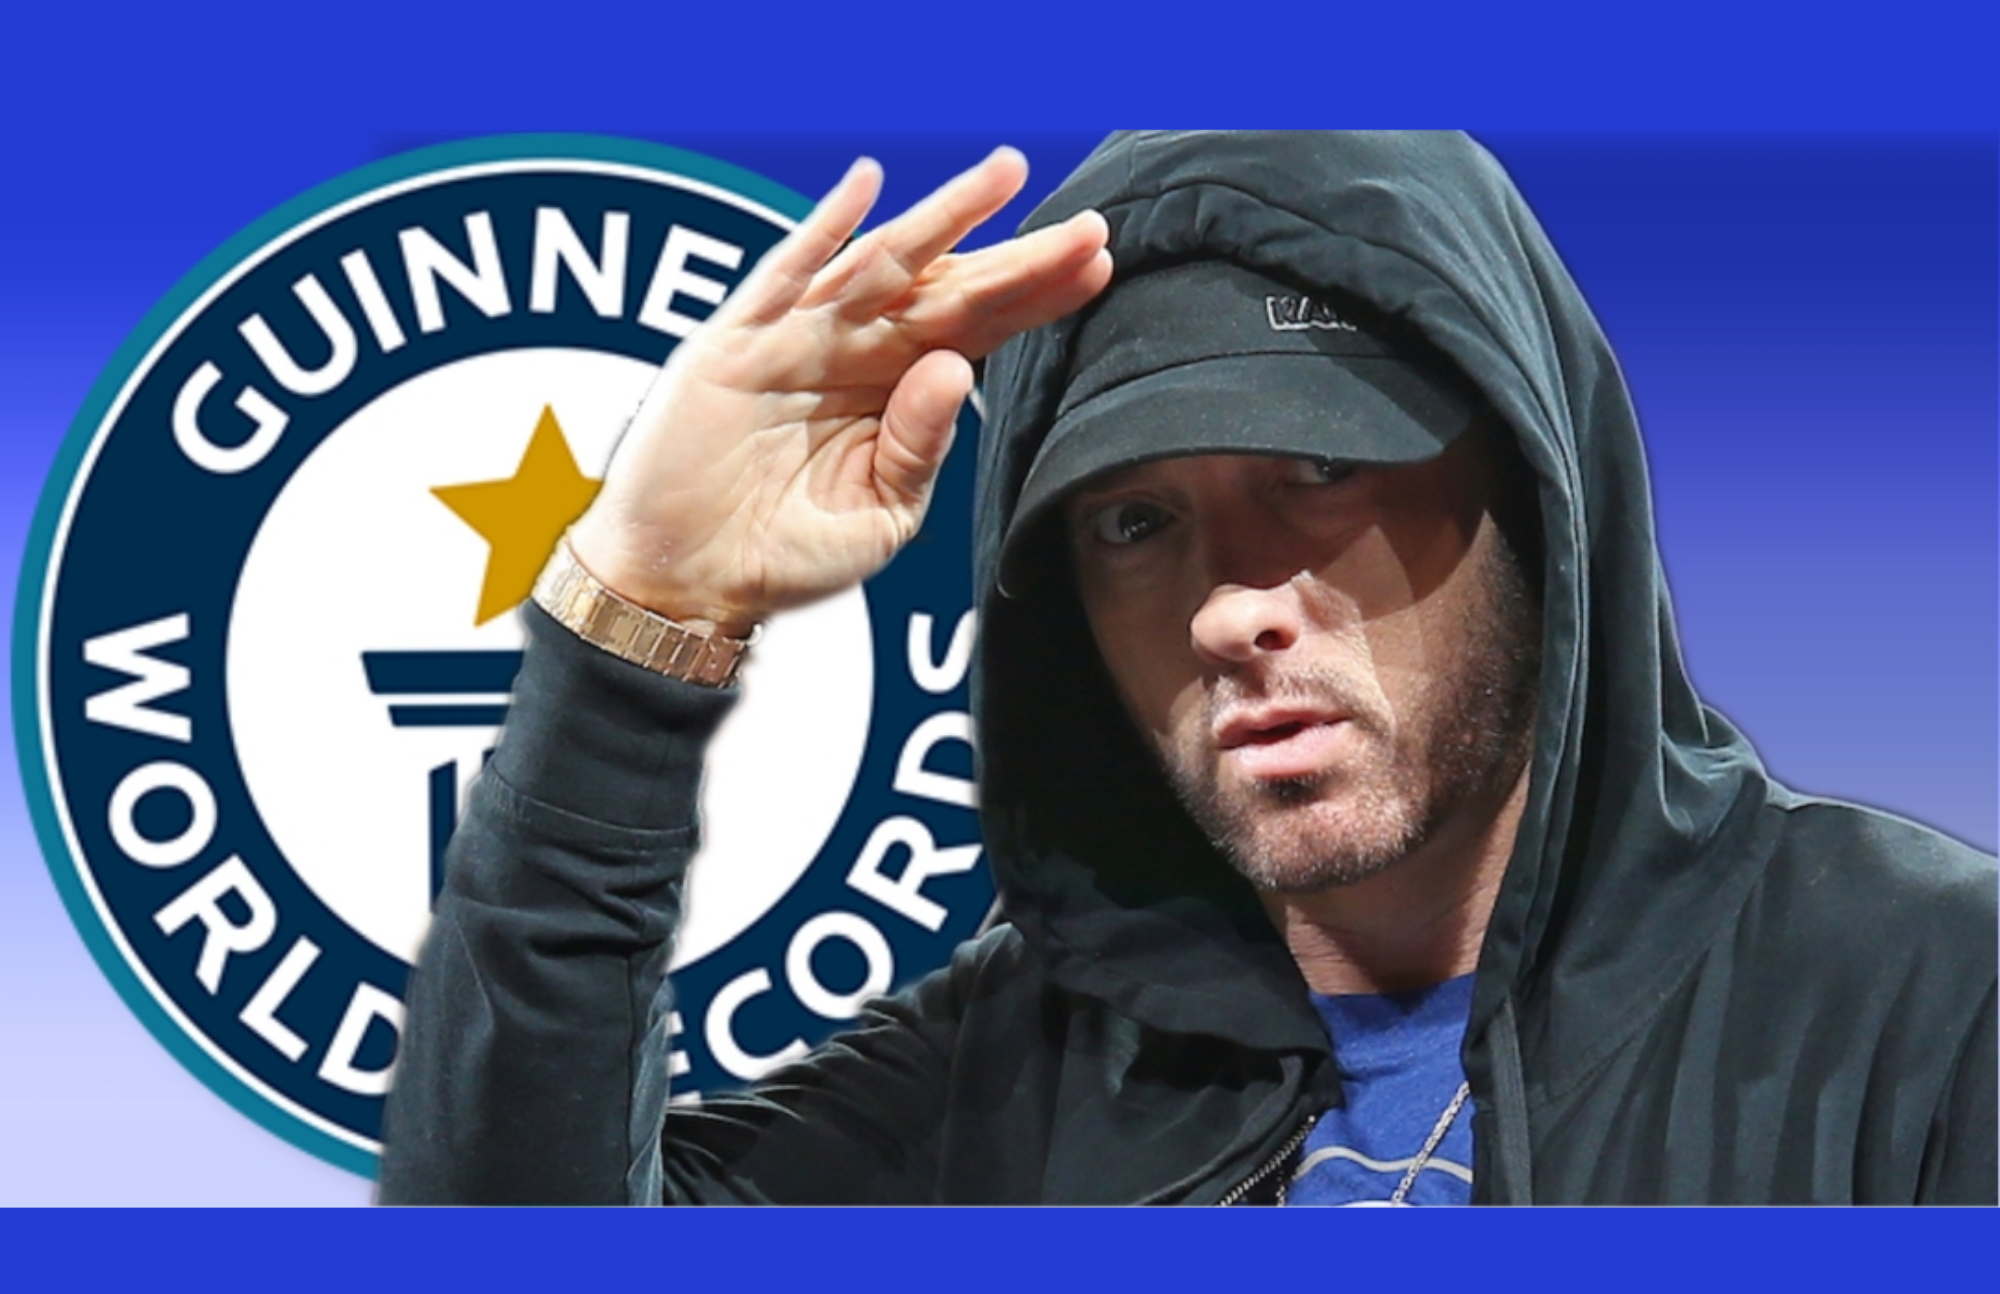 Eminem saluting over a background of Guinness World Records